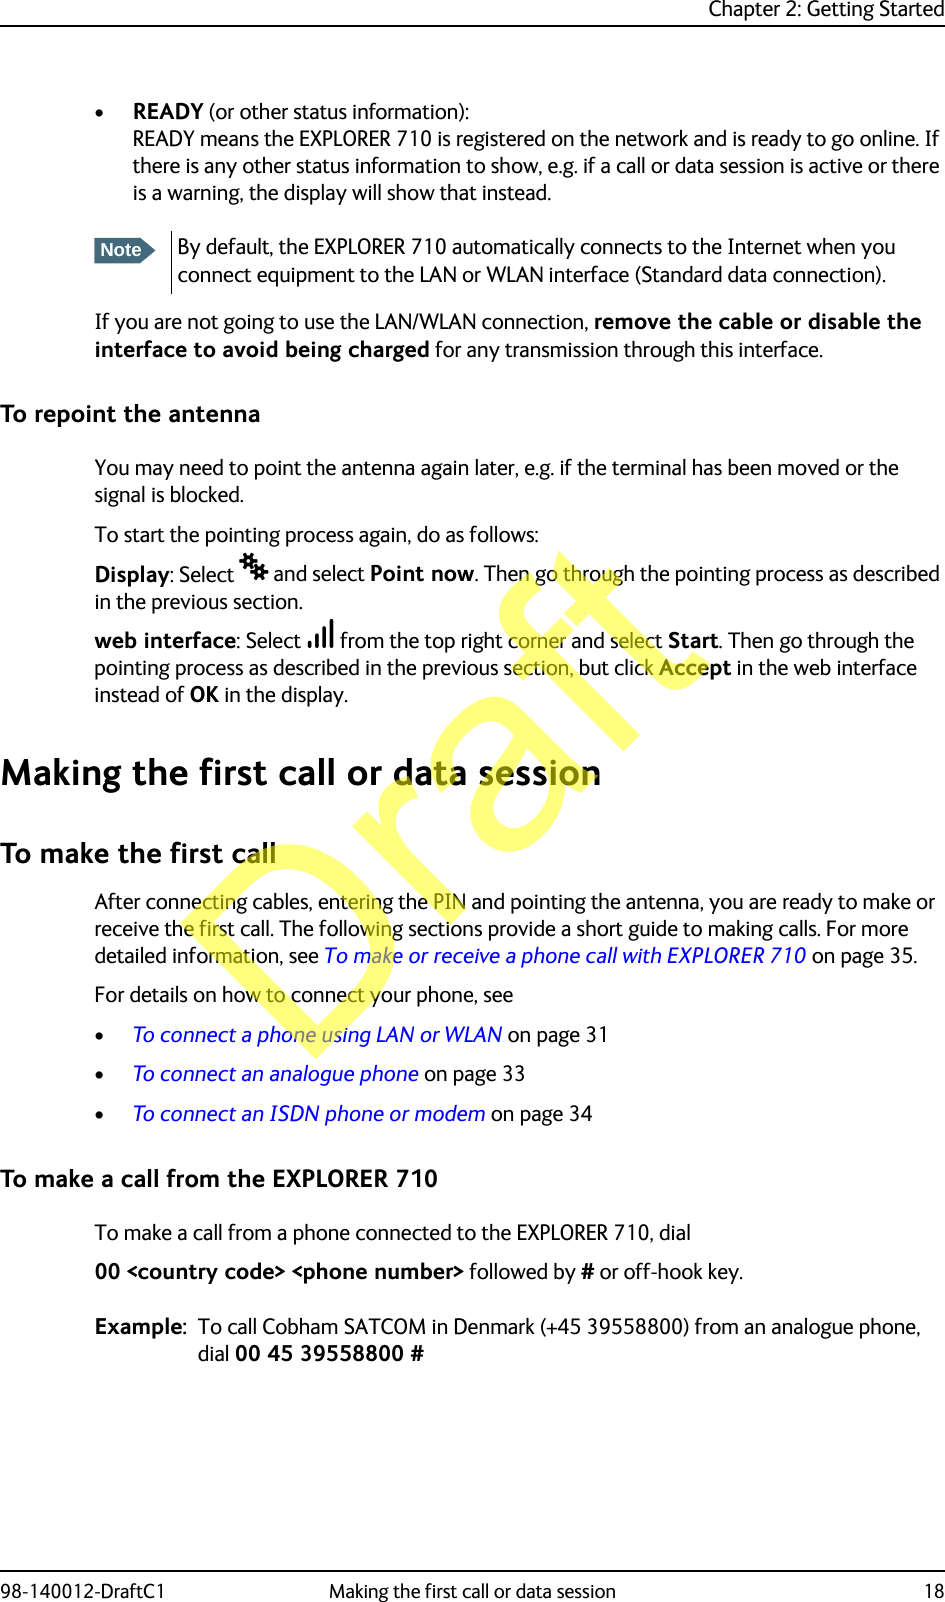 Chapter 2: Getting Started98-140012-DraftC1 Making the first call or data session 18•READY (or other status information): READY means the EXPLORER 710 is registered on the network and is ready to go online. If there is any other status information to show, e.g. if a call or data session is active or there is a warning, the display will show that instead.If you are not going to use the LAN/WLAN connection, remove the cable or disable the interface to avoid being charged for any transmission through this interface.To repoint the antennaYou may need to point the antenna again later, e.g. if the terminal has been moved or the signal is blocked.To start the pointing process again, do as follows:Display: Select  and select Point now. Then go through the pointing process as described in the previous section.web interface: Select  from the top right corner and select Start. Then go through the pointing process as described in the previous section, but click Accept in the web interface instead of OK in the display.Making the first call or data sessionTo make the first callAfter connecting cables, entering the PIN and pointing the antenna, you are ready to make or receive the first call. The following sections provide a short guide to making calls. For more detailed information, see To make or receive a phone call with EXPLORER 710 on page 35.For details on how to connect your phone, see•To connect a phone using LAN or WLAN on page 31•To connect an analogue phone on page 33•To connect an ISDN phone or modem on page 34To make a call from the EXPLORER 710To make a call from a phone connected to the EXPLORER 710, dial00 &lt;country code&gt; &lt;phone number&gt; followed by # or off-hook key.Example: To call Cobham SATCOM in Denmark (+45 39558800) from an analogue phone, dial 00 45 39558800 #NoteBy default, the EXPLORER 710 automatically connects to the Internet when you connect equipment to the LAN or WLAN interface (Standard data connection).Draft